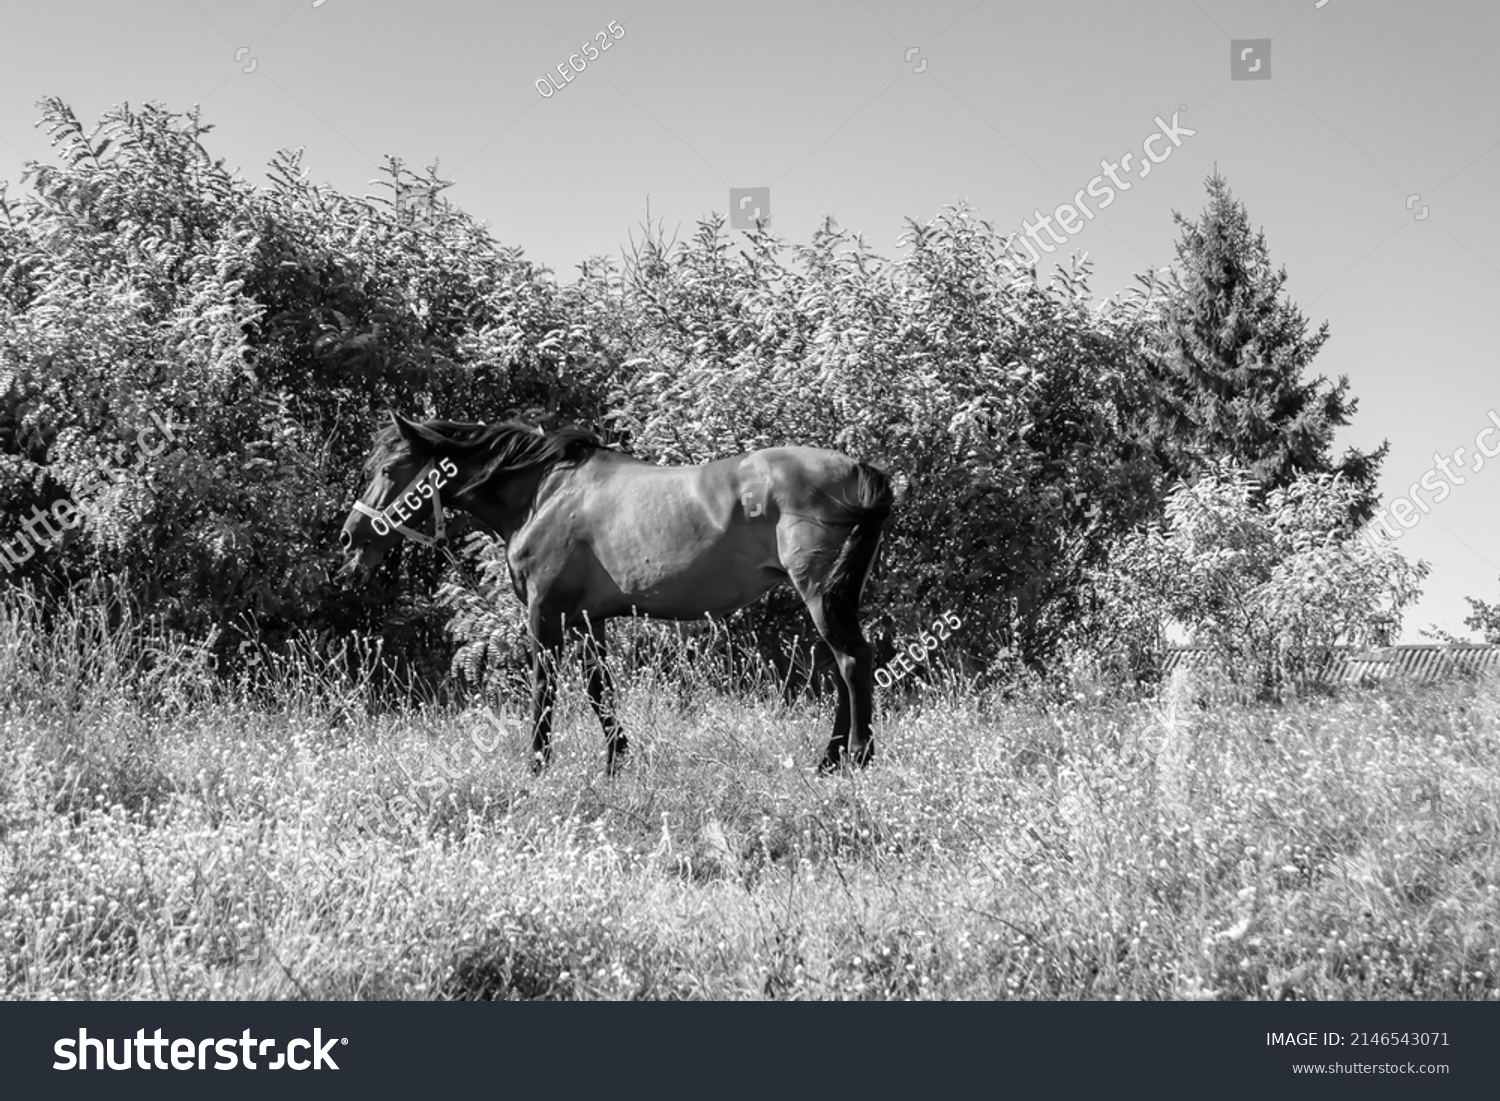 Beautiful wild brown horse stallion on summer flower meadow, equine eating green grass, horse stallion with long mane portrait in standing position, equine stallion outdoors, big horse equines #2146543071